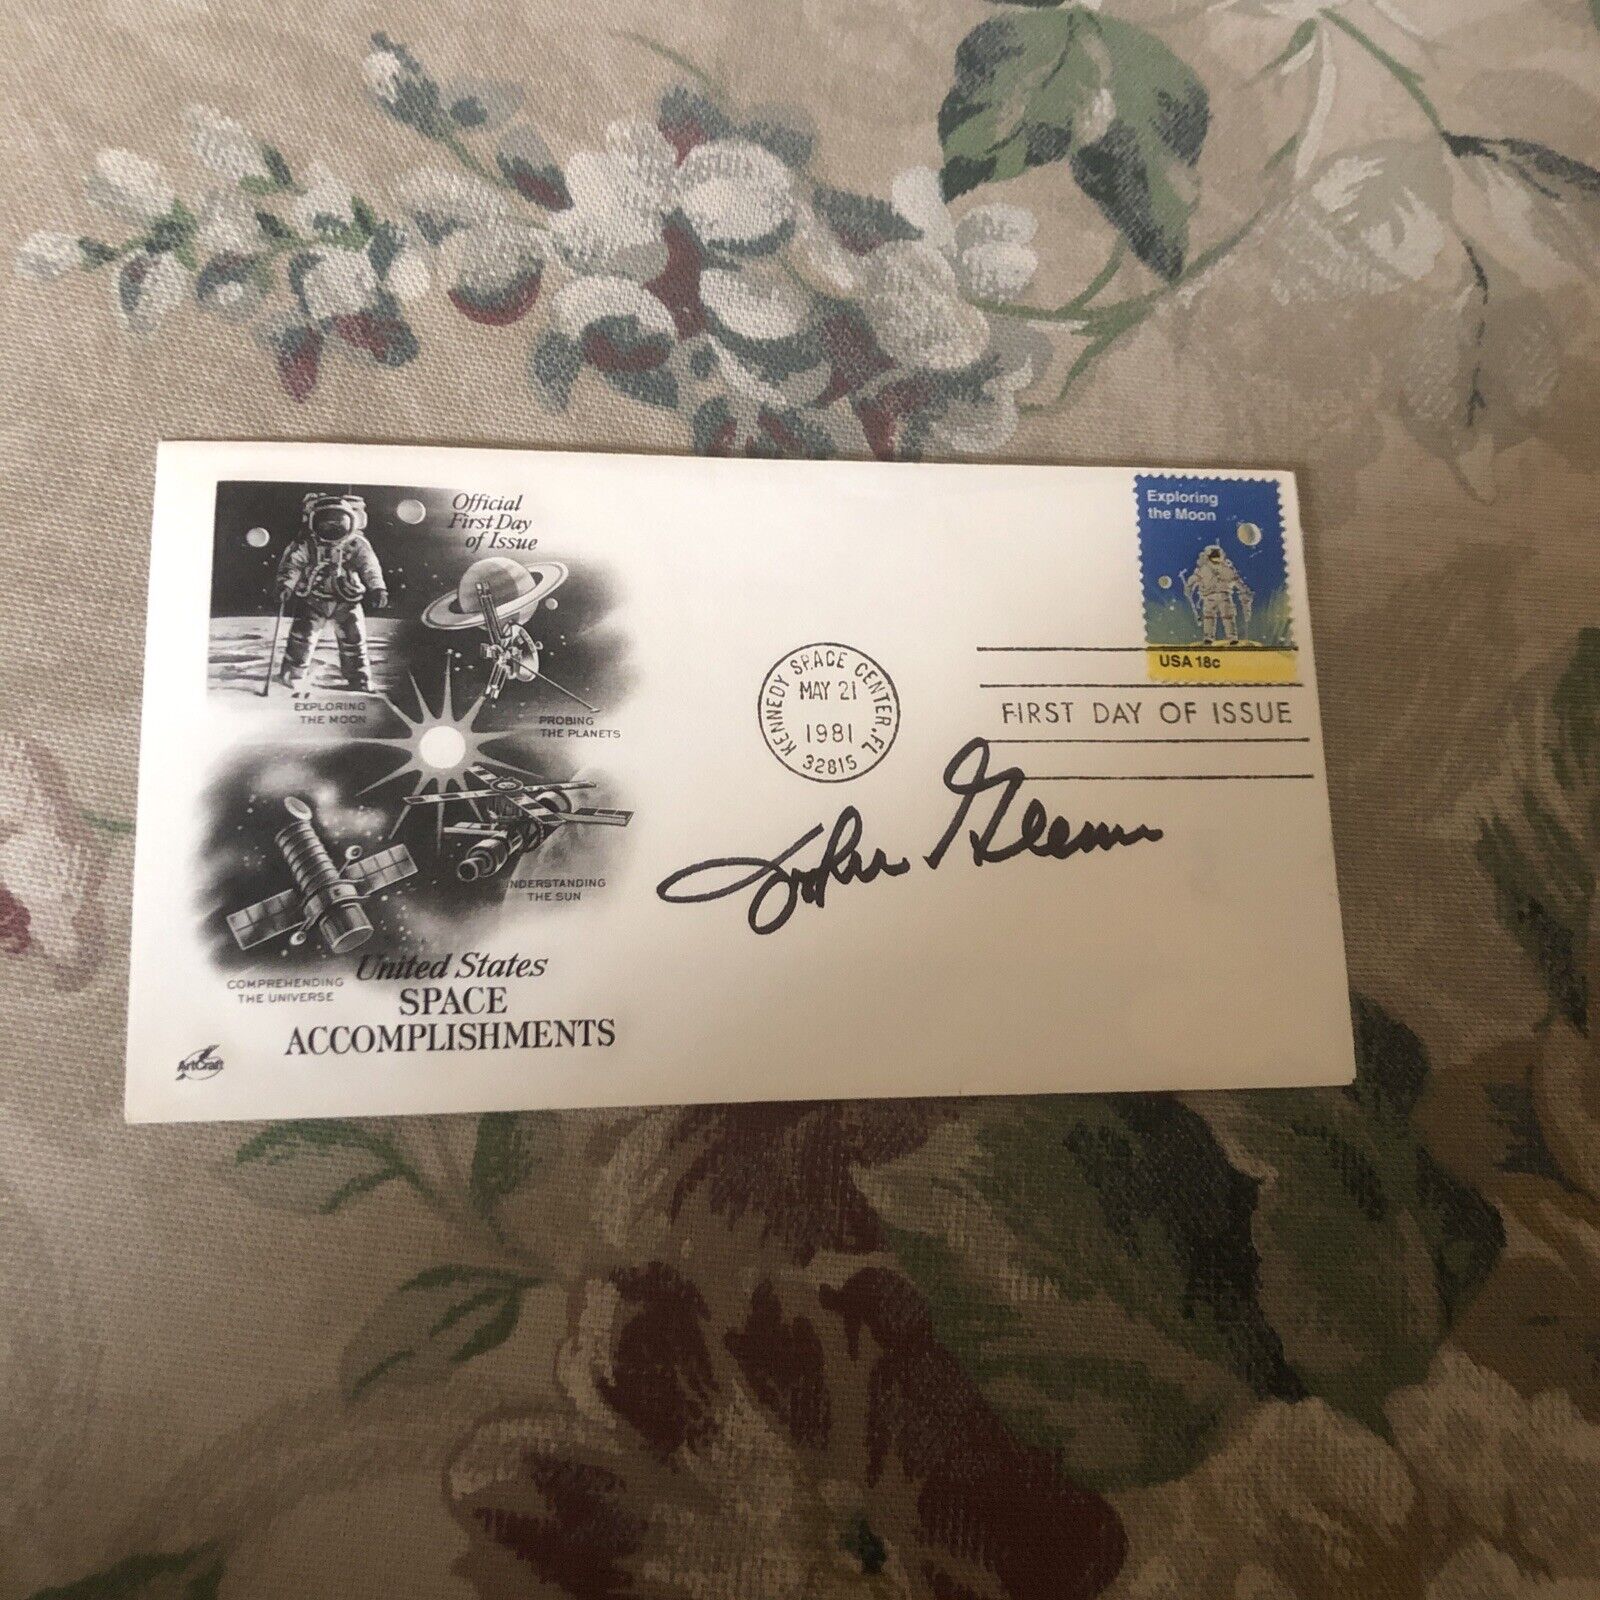 JOHN GLENN Signed US Space Accomplishments 1981  First Day Cover - Authentic JSA